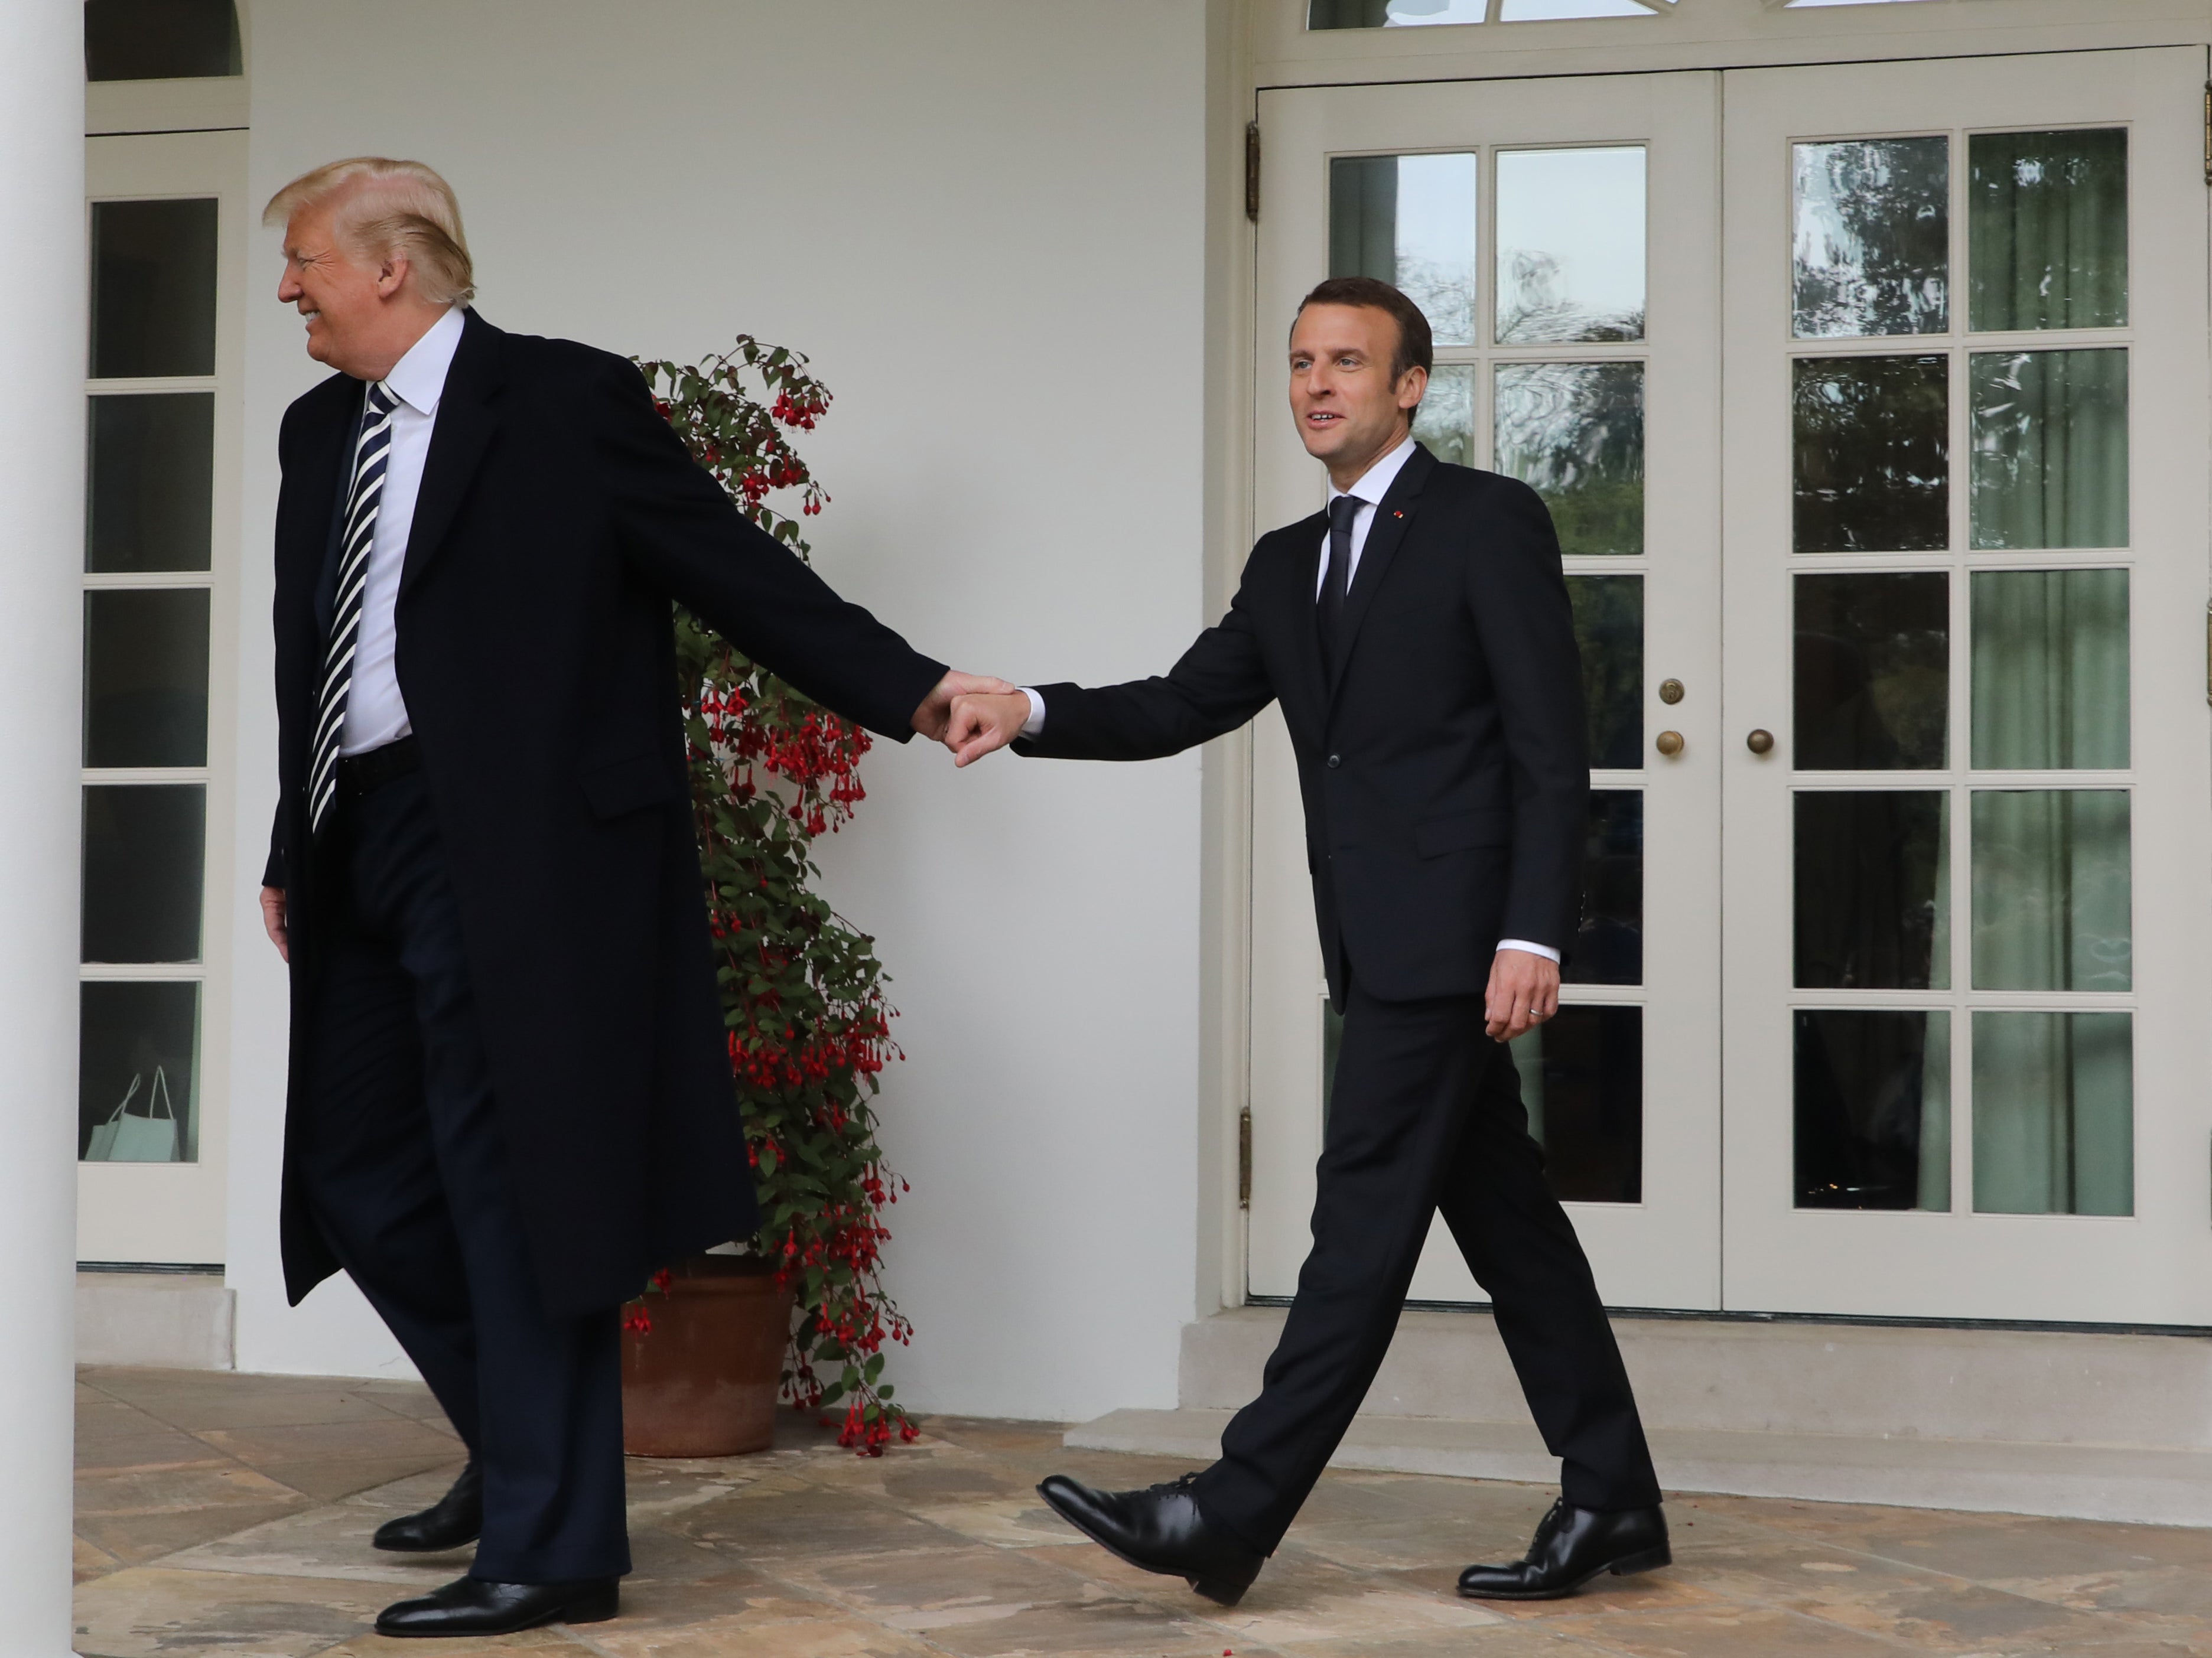 French President Emmanuel Macron and Donald Trump walk hand in hand under the colonnades of the White House in Washington on 24 April 2018